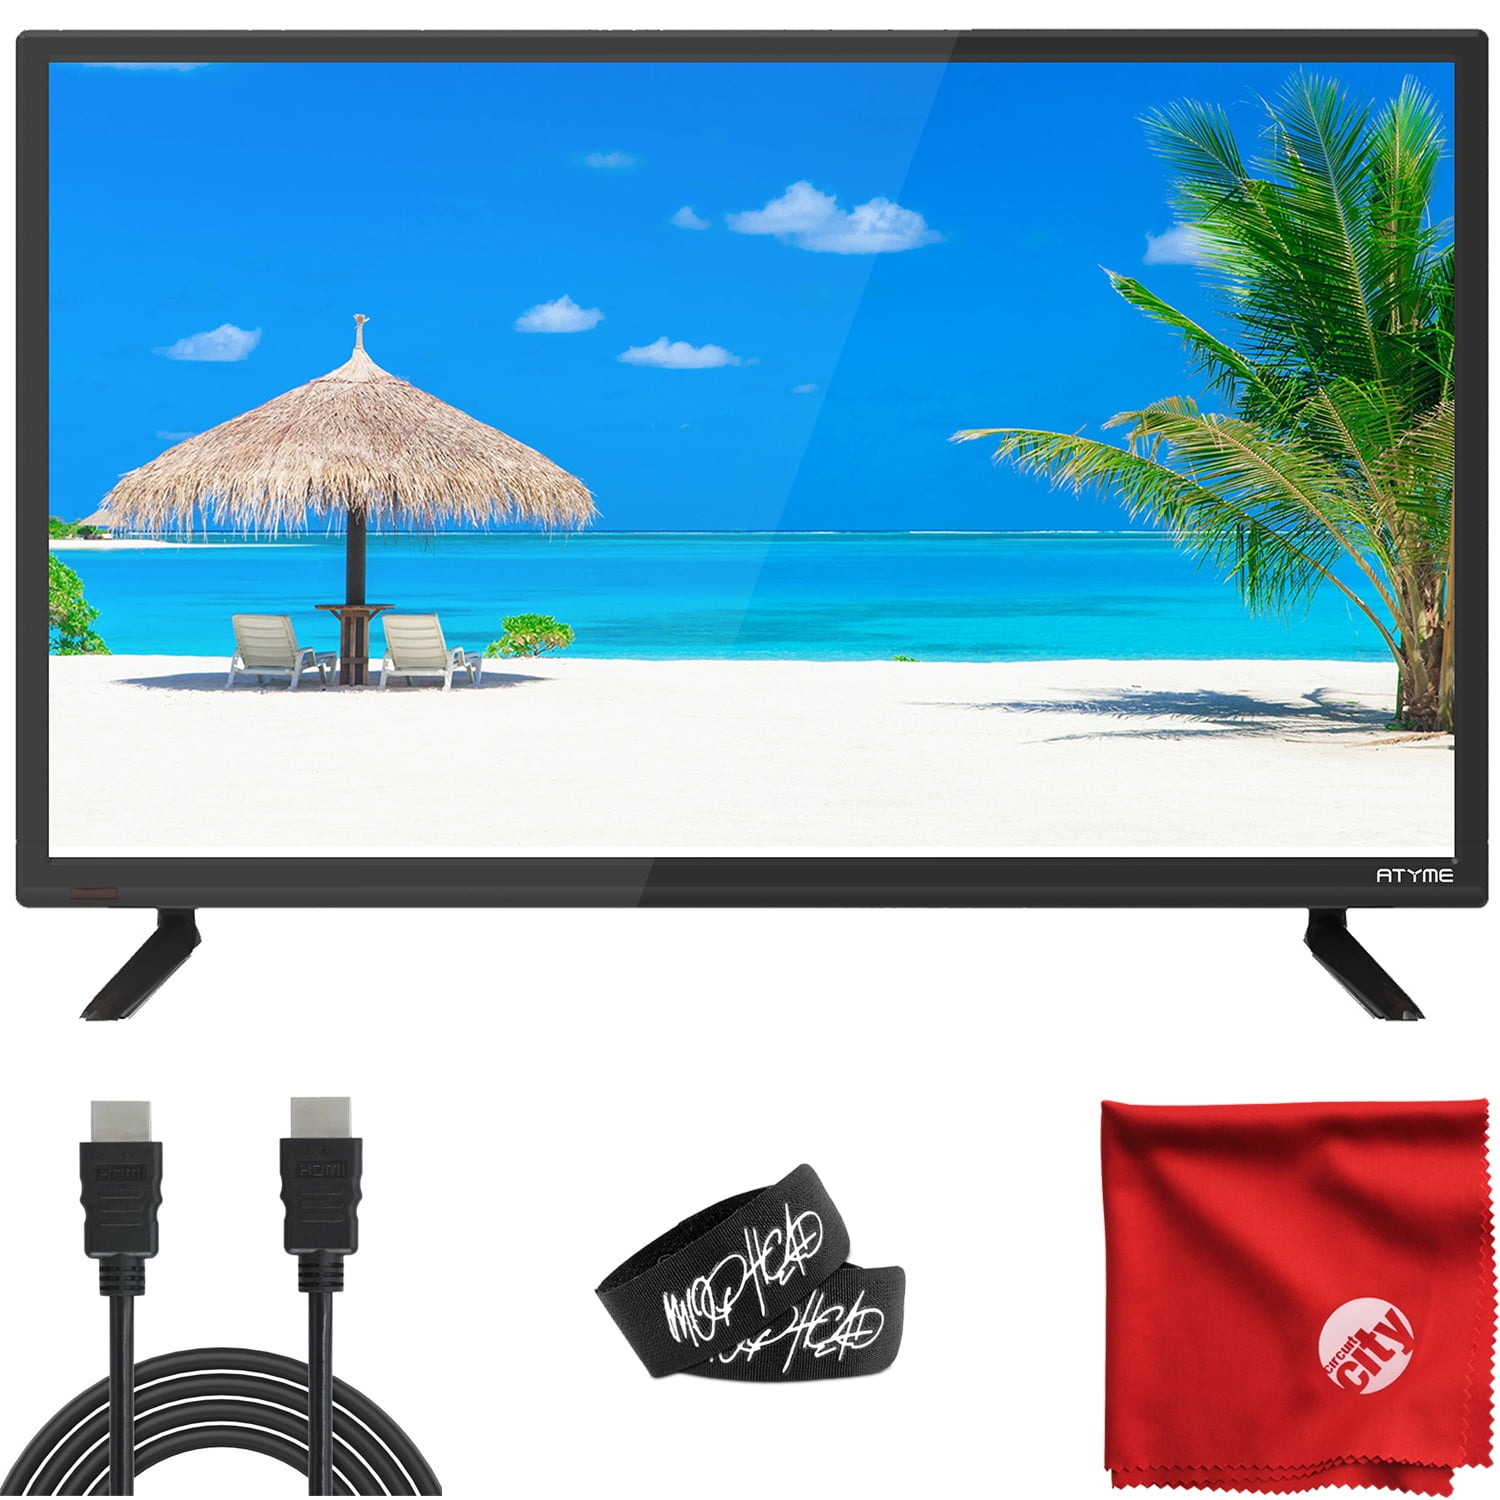 ATYME 24-Inch 720p 60Hz LED HD TV (240AH5HD) Lightweight Slim Built-in with HDMI, USB, VGA, High Resolution Bundle with Circuit City 6-Foot Ultra High Definition 4K HDMI Cable & Accessories (4 Items)